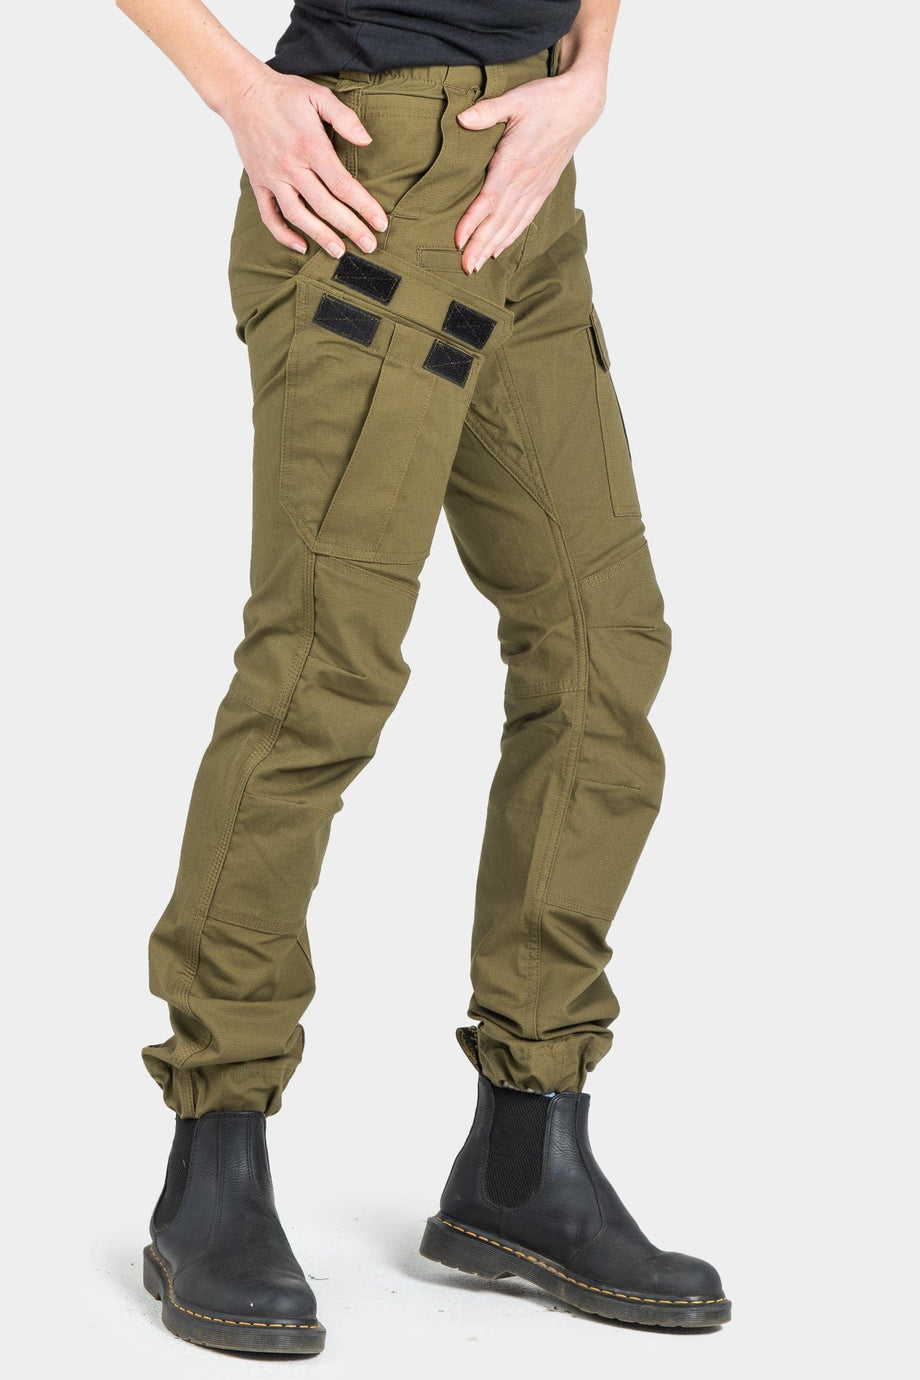 Fall Transition Outfits: Olive Cargo Pants - Get Your Pretty On®